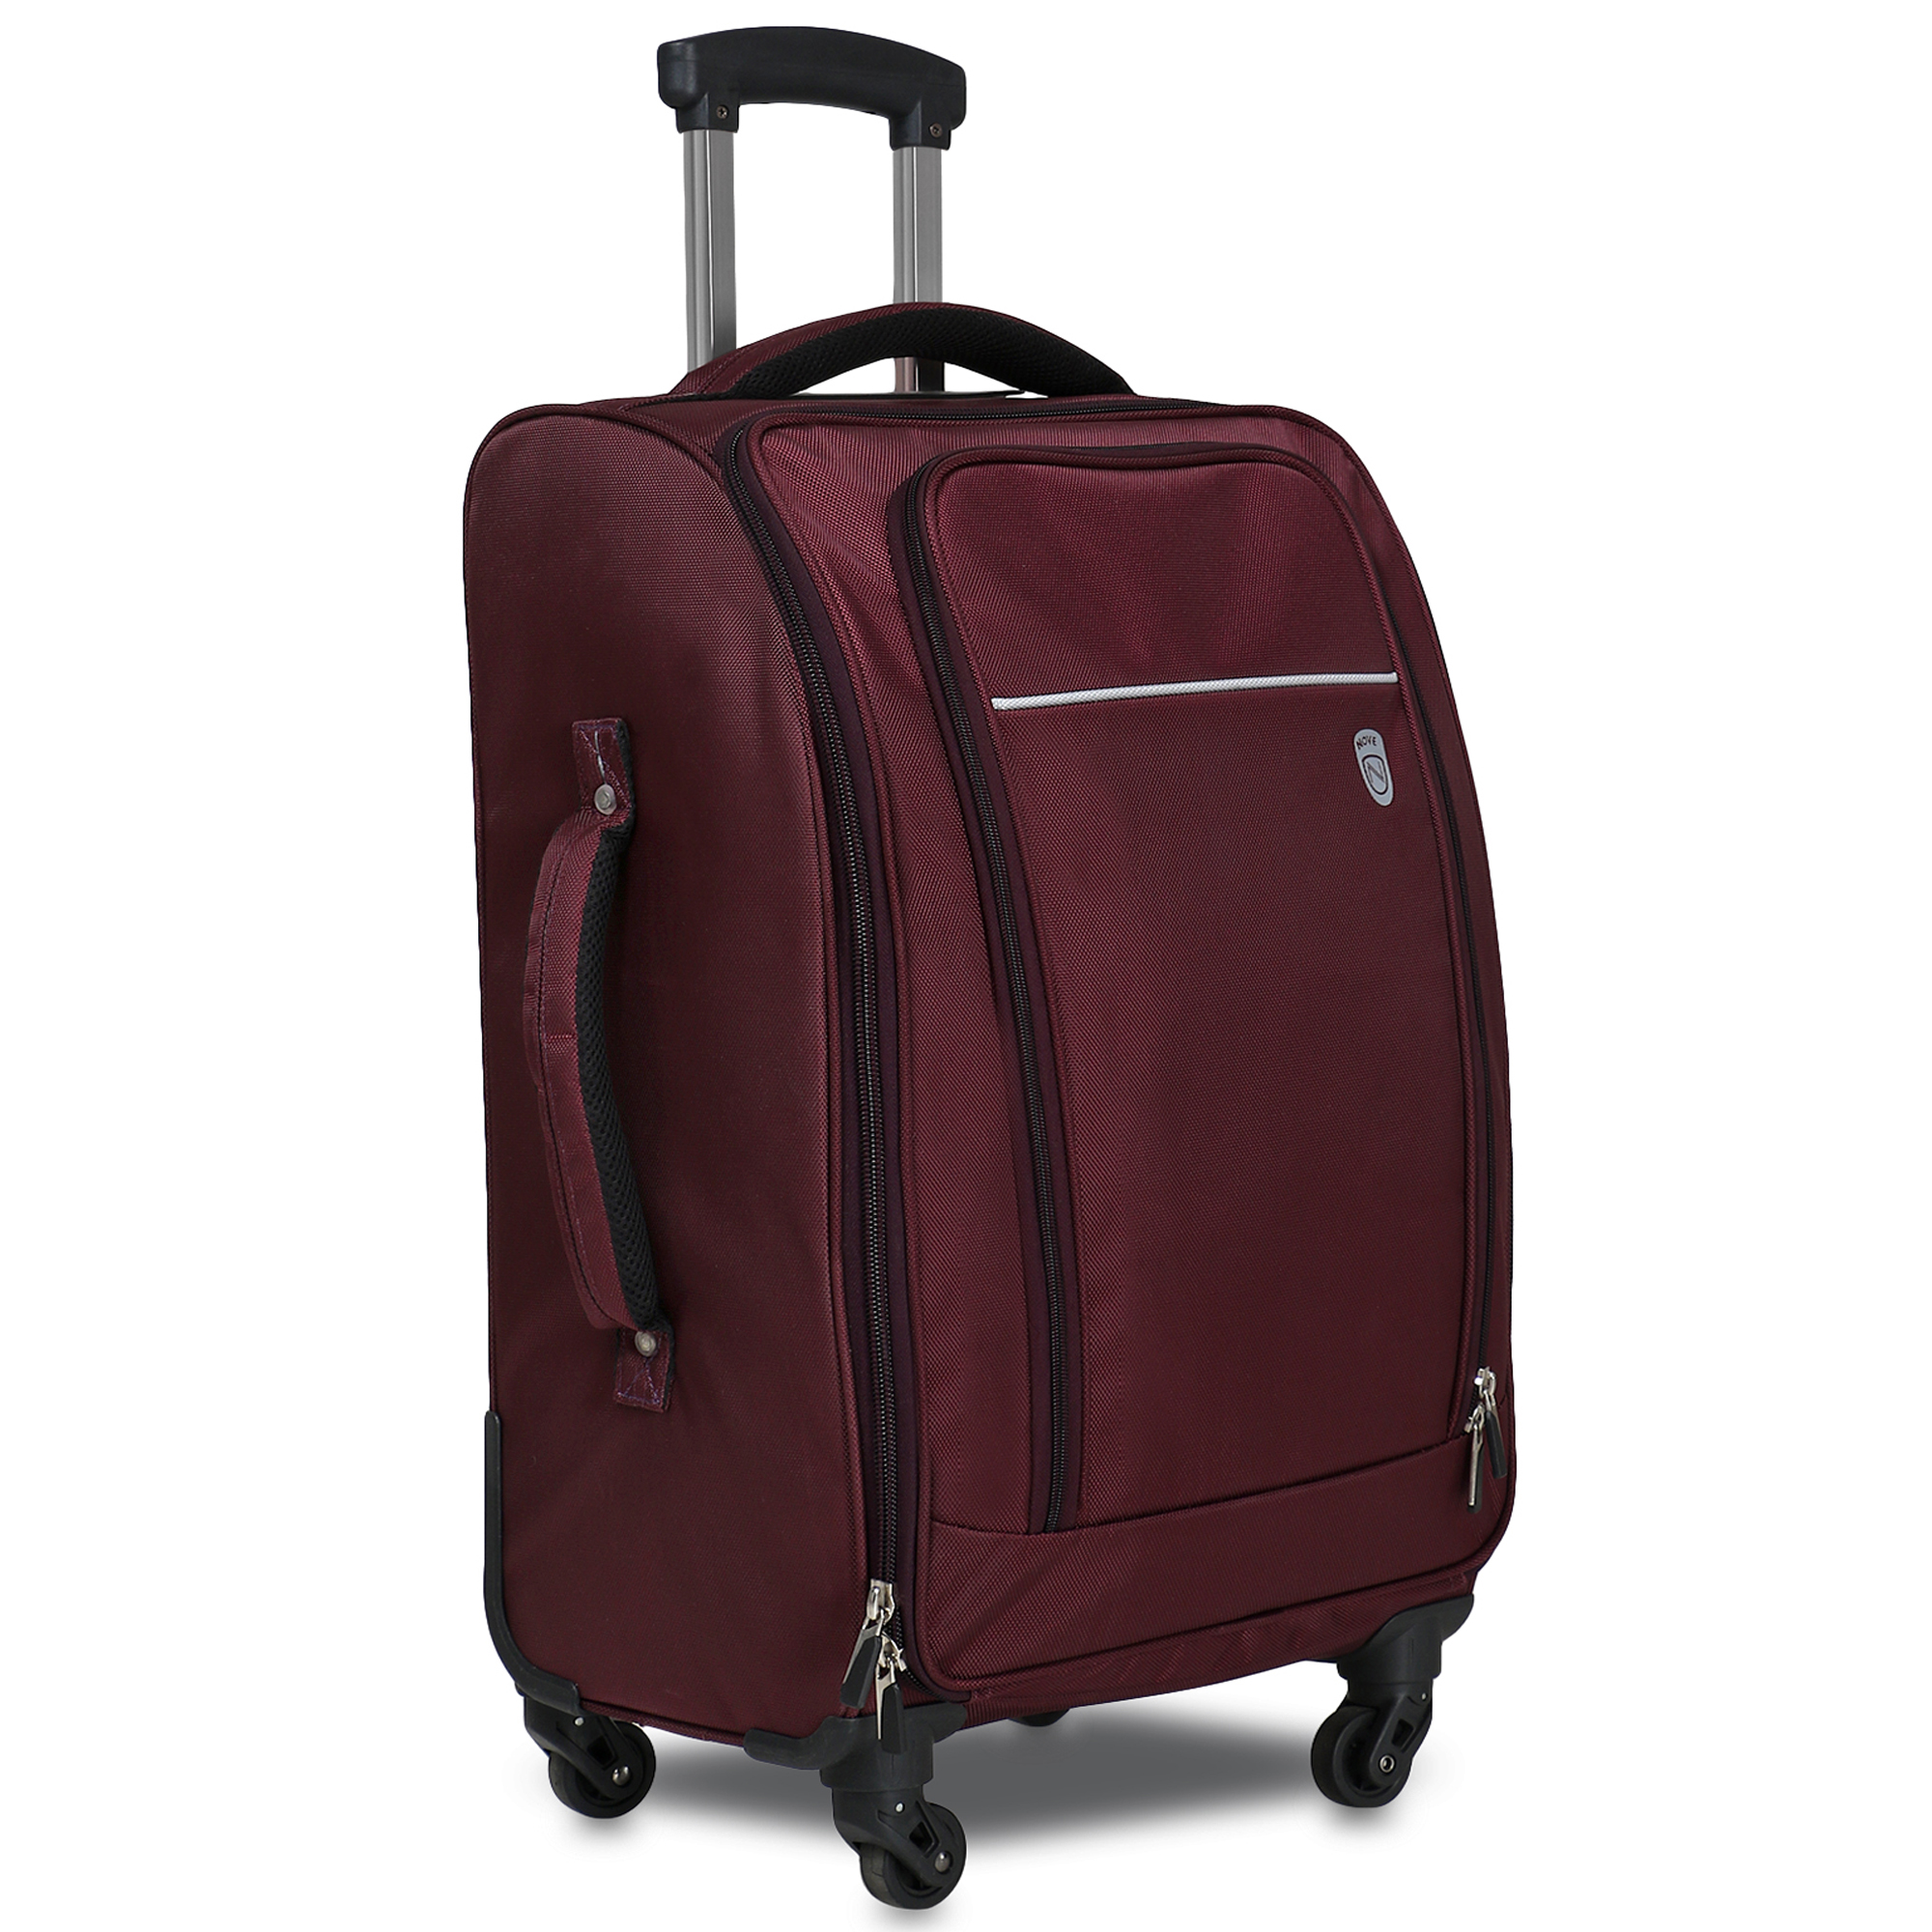 Buy Novex Harman Wine 65 cms Travel Luggage Online @ ₹3499 from ShopClues